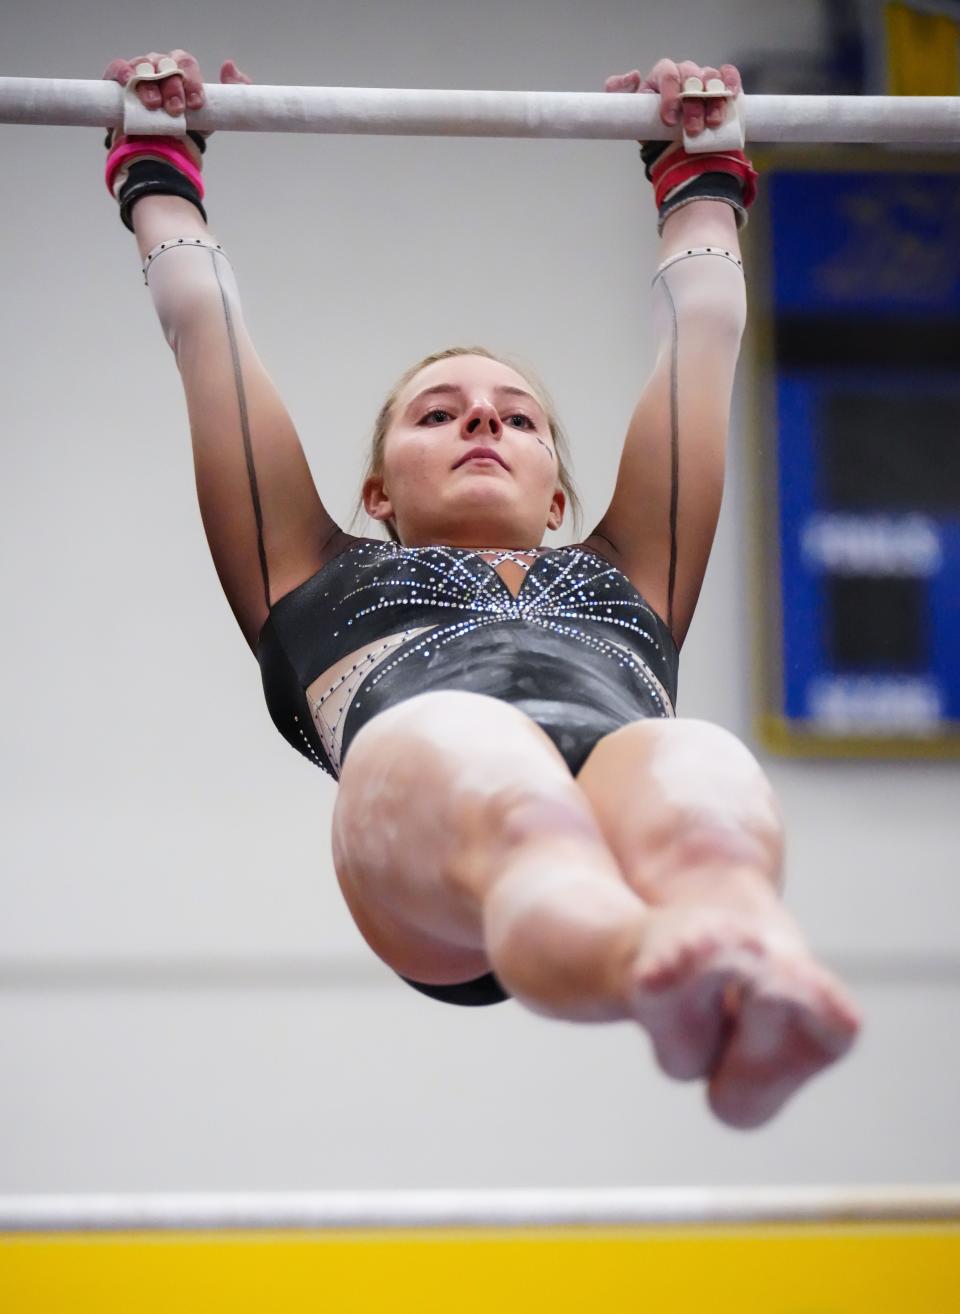 Franklin/Muskego co-op gymnast Kaylee Stoeger competes on the uneven bars during the Division 1 sectional at Mukwonago High School in February.